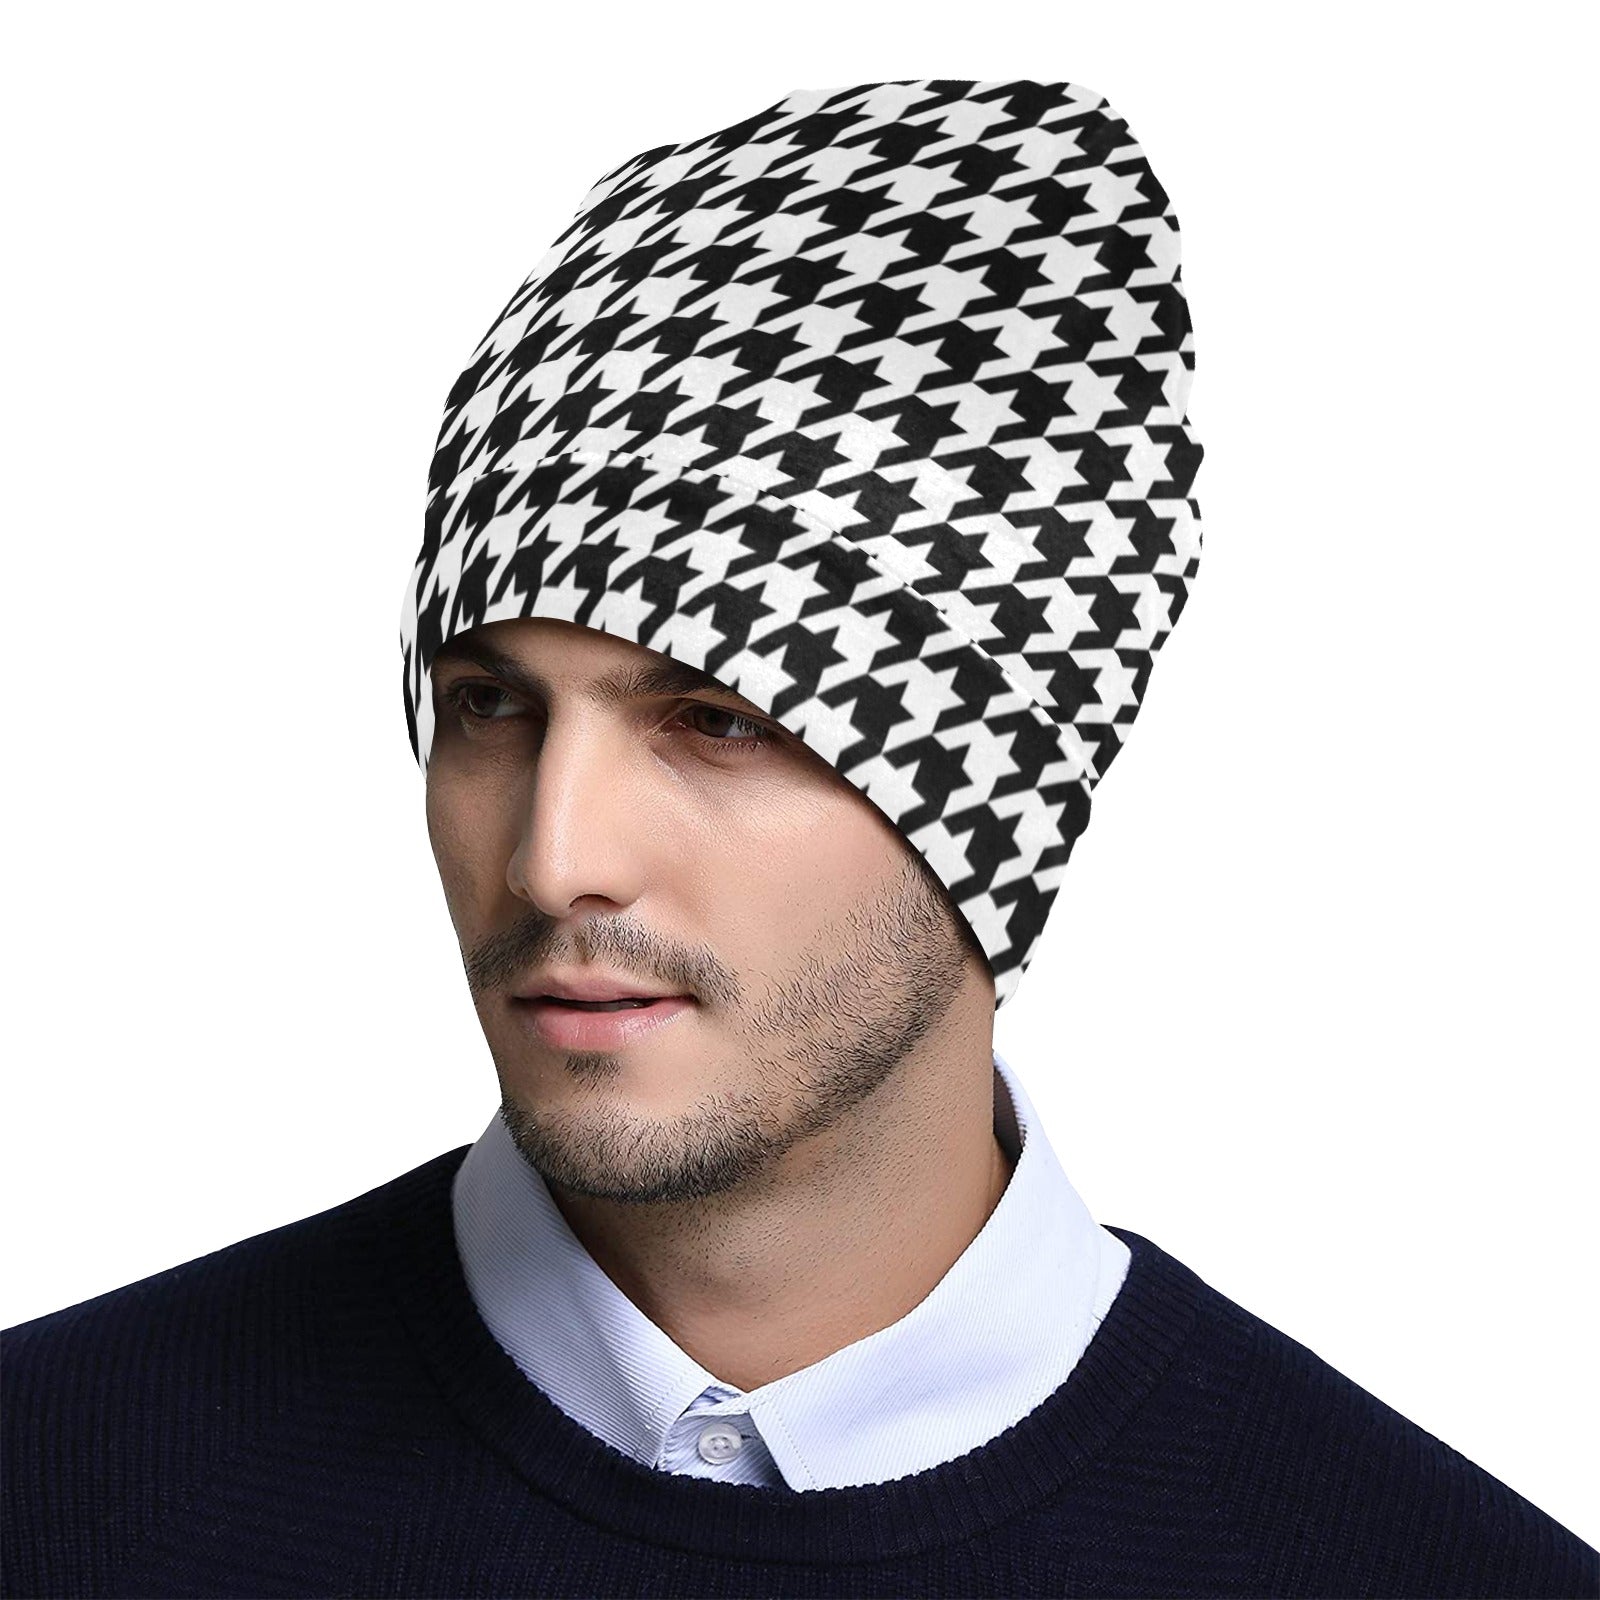 Houndstooth Beanie, Black White Pattern Soft Fleece Party Men Women Cute Stretchy Winter Adult Aesthetic Cap Hat Gift Starcove Fashion